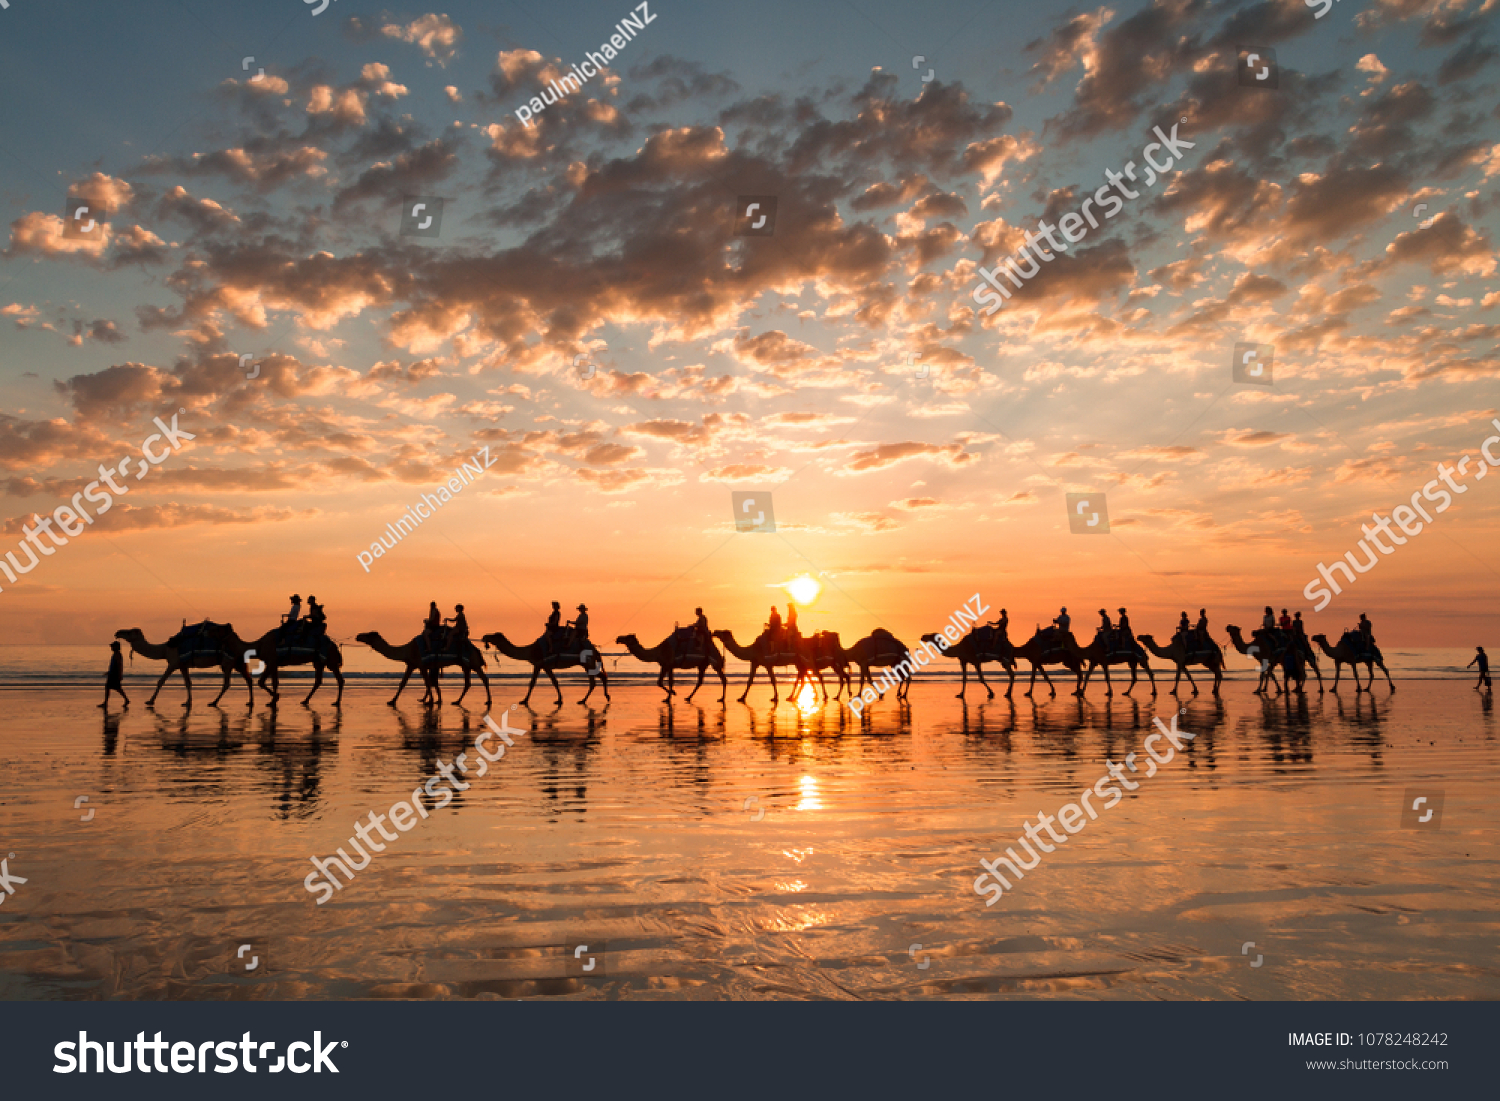 A golden sunset on Cable Beach featuring the famous Broome Camel ride.  #1078248242